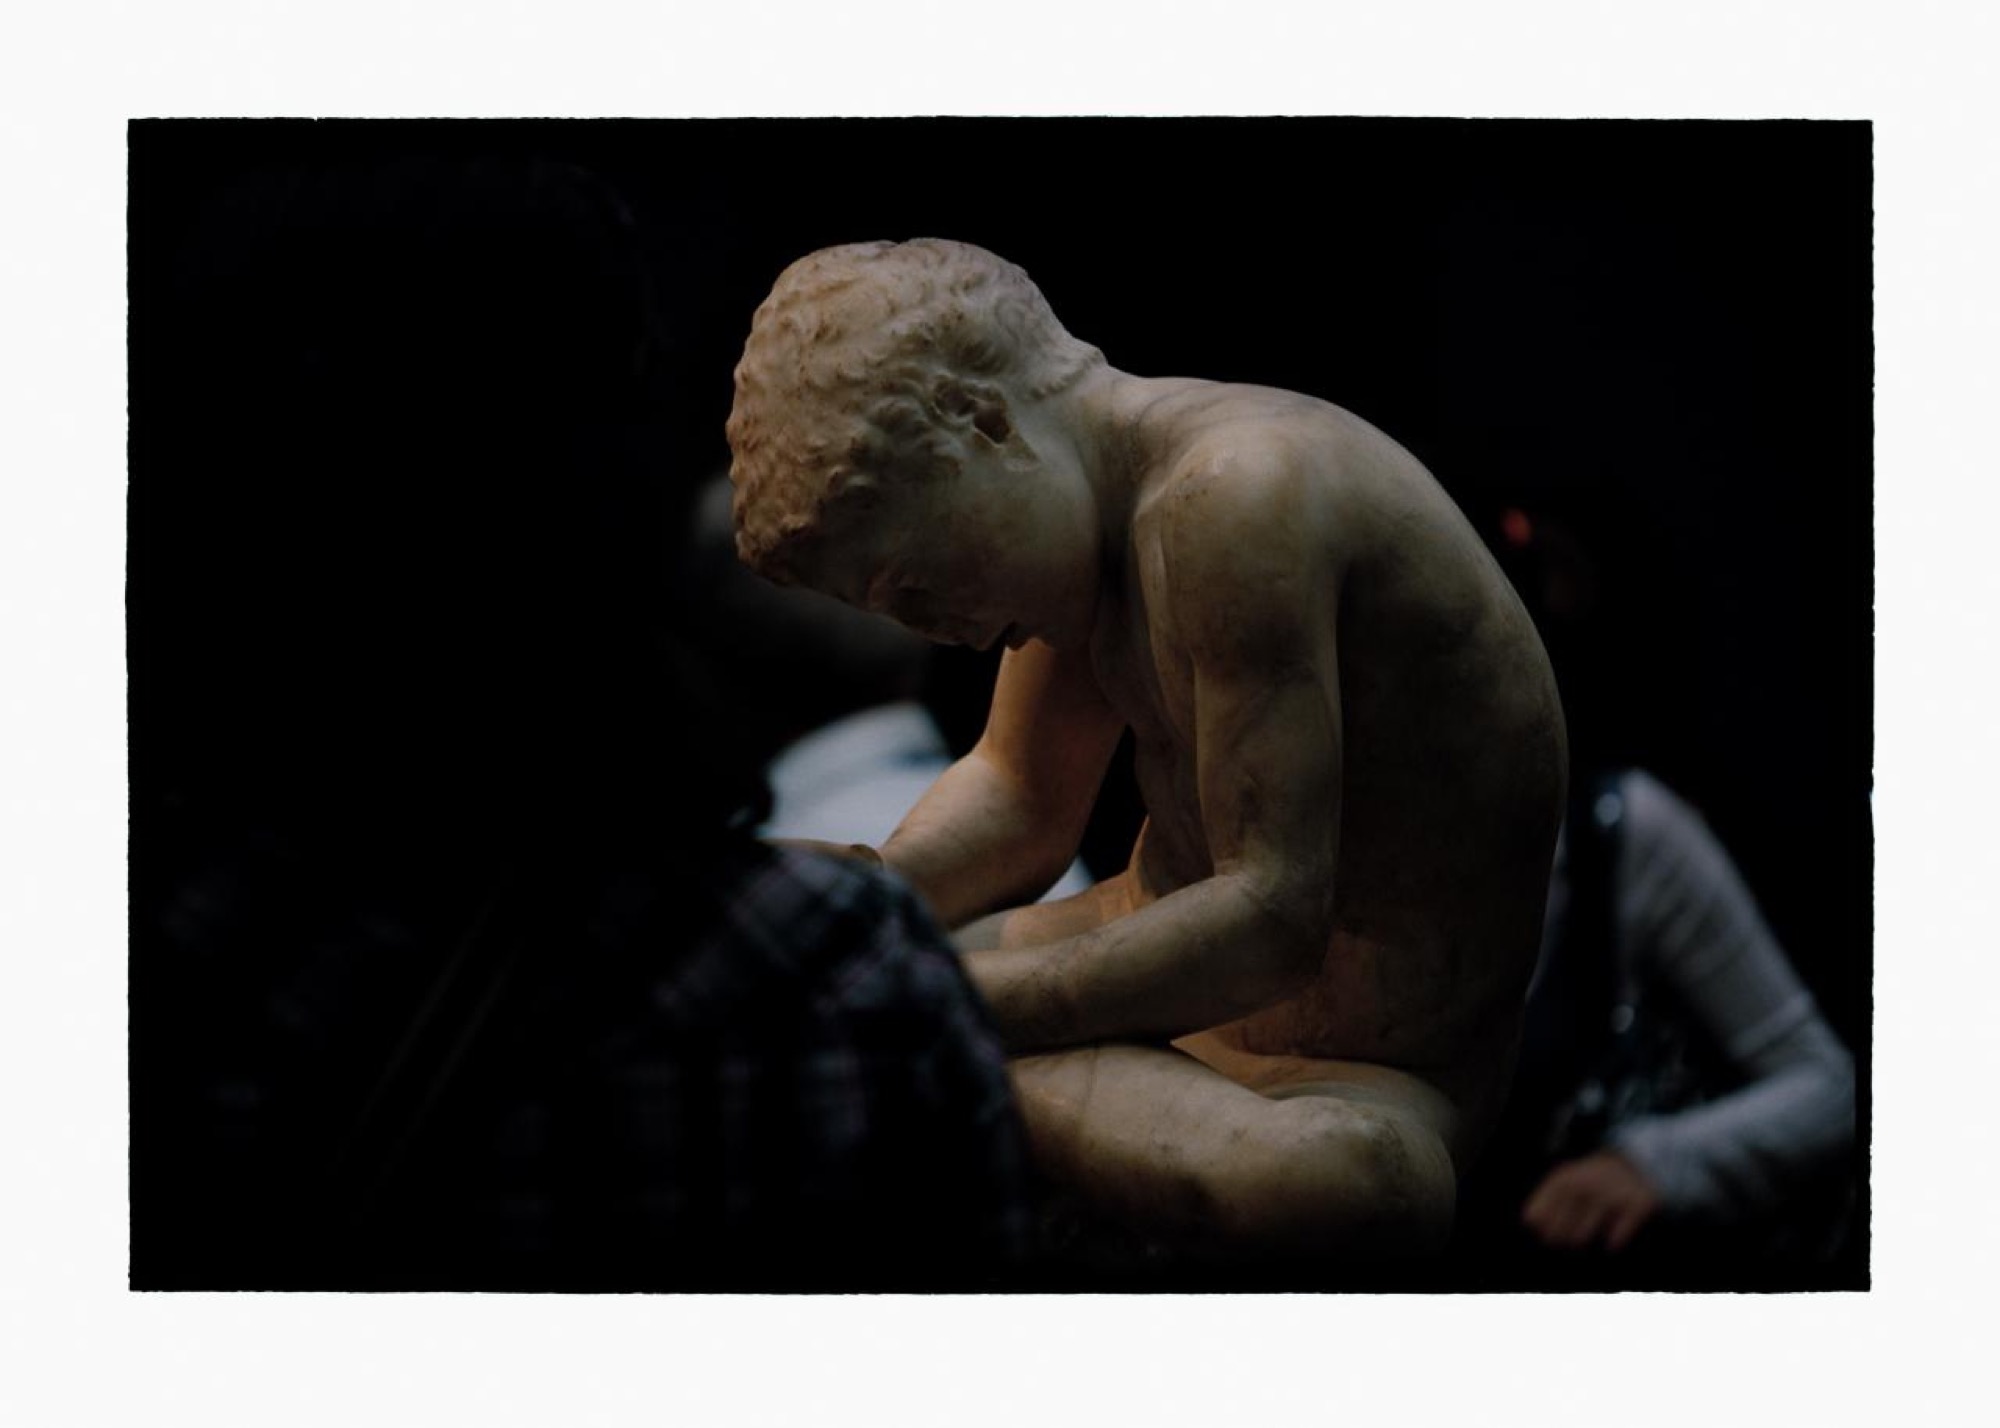 Bill Henson, <em>Untitled</em>, inkjet print, 127.0 x 180.0 cm, ed. 1/5, National Gallery of Victoria, Melbourne, Gift of William Donald Bowness through the Australian Government’s Cultural Gifts Program, 2016.